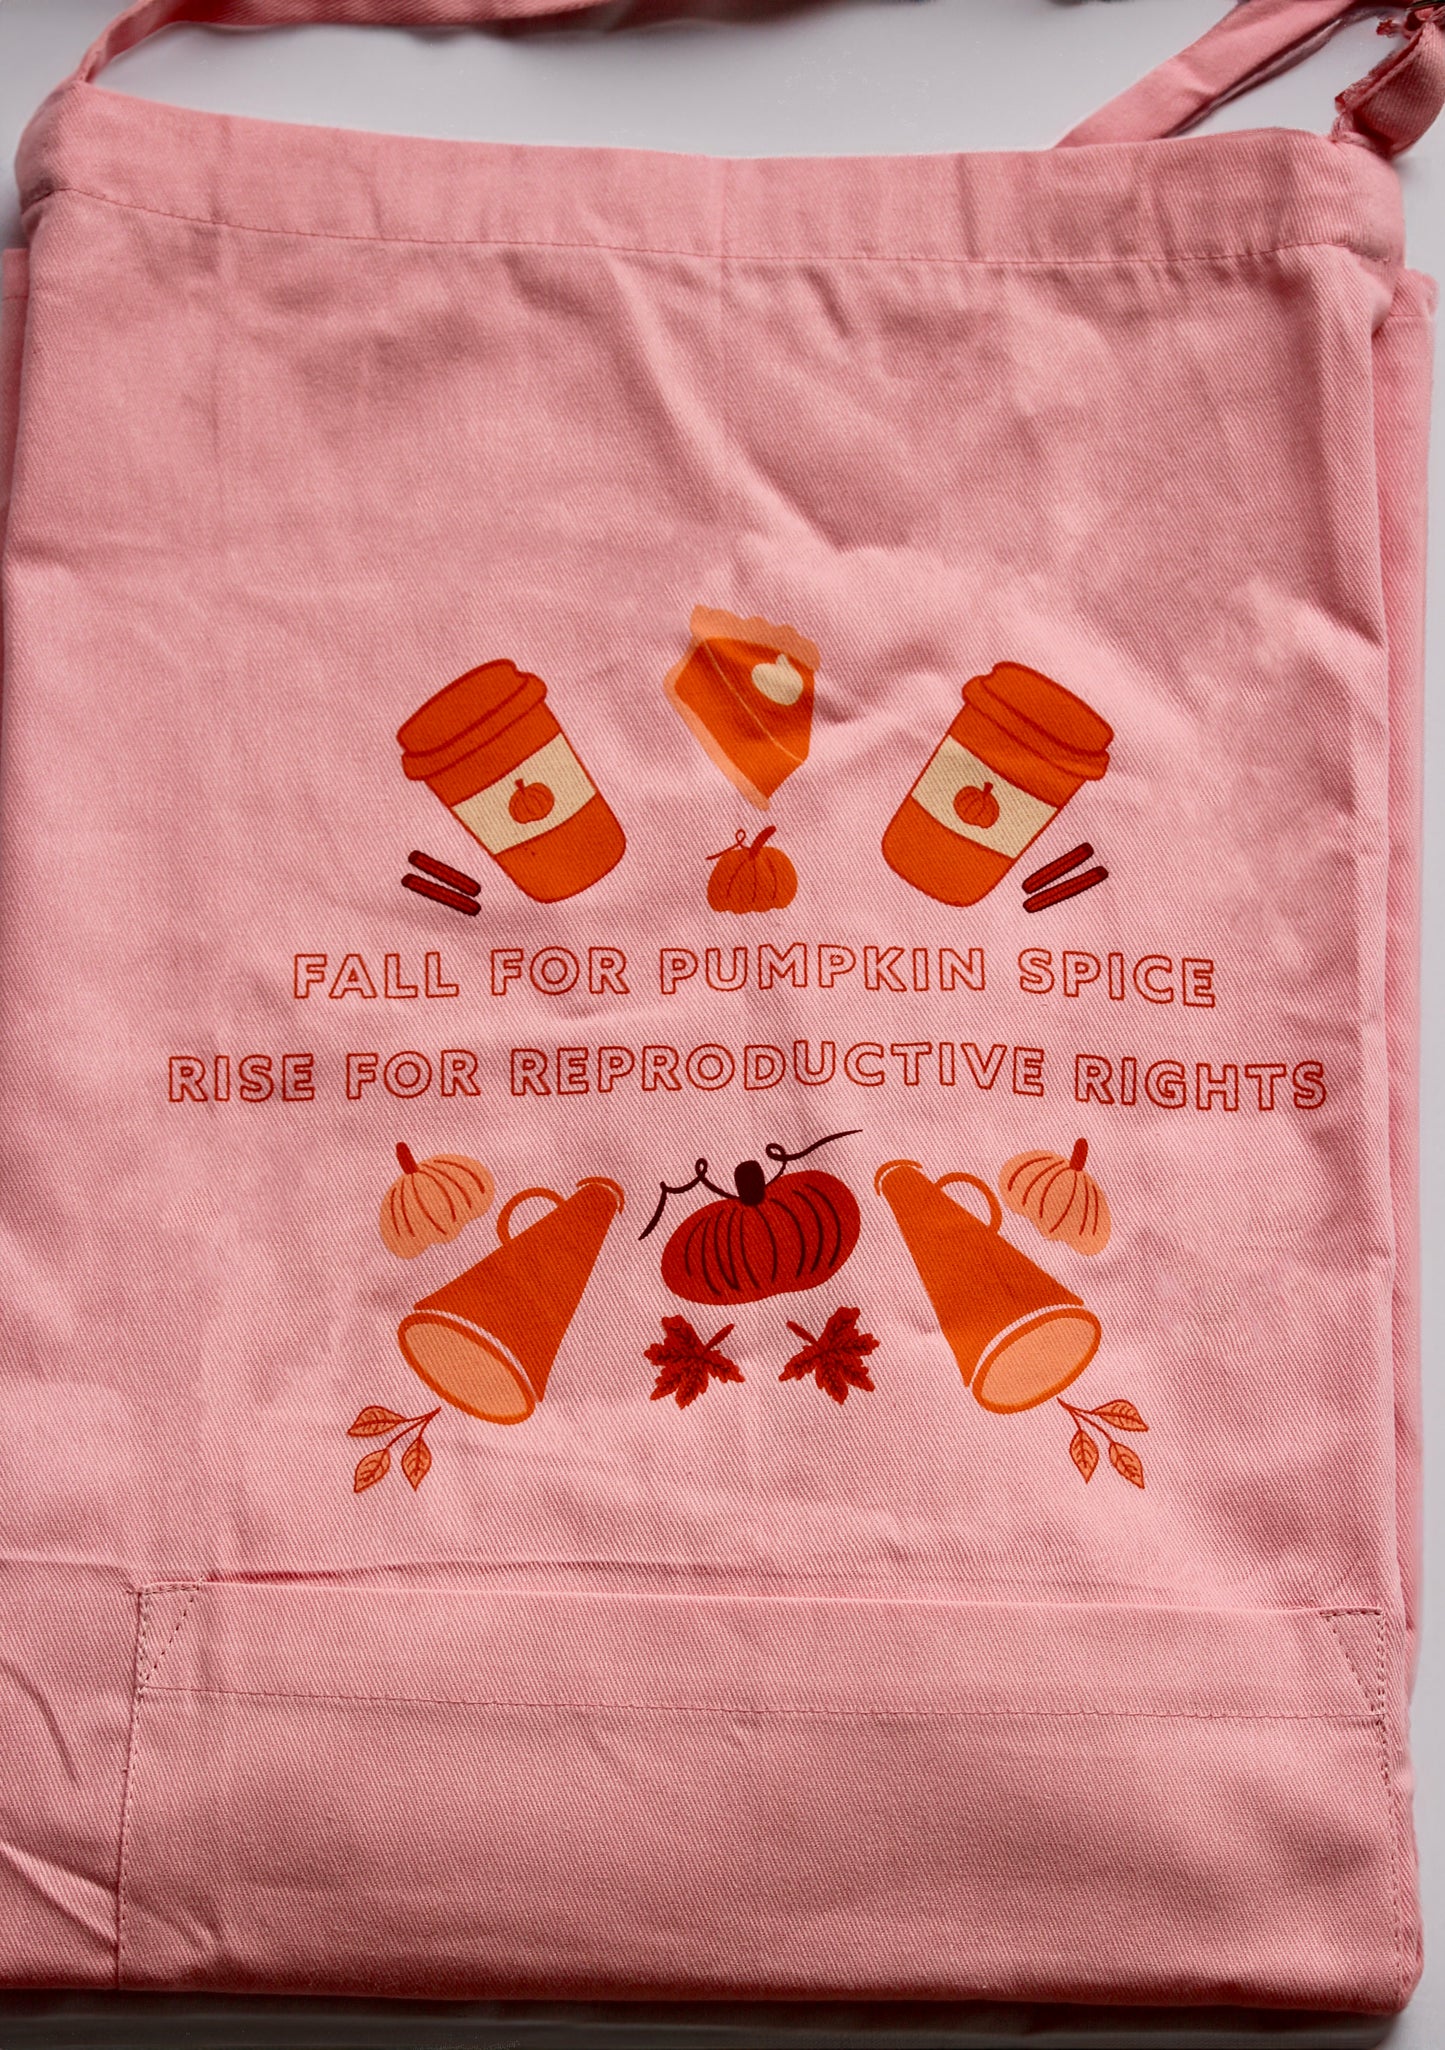 Pumpkin Spice and Reproductive Rights Apron